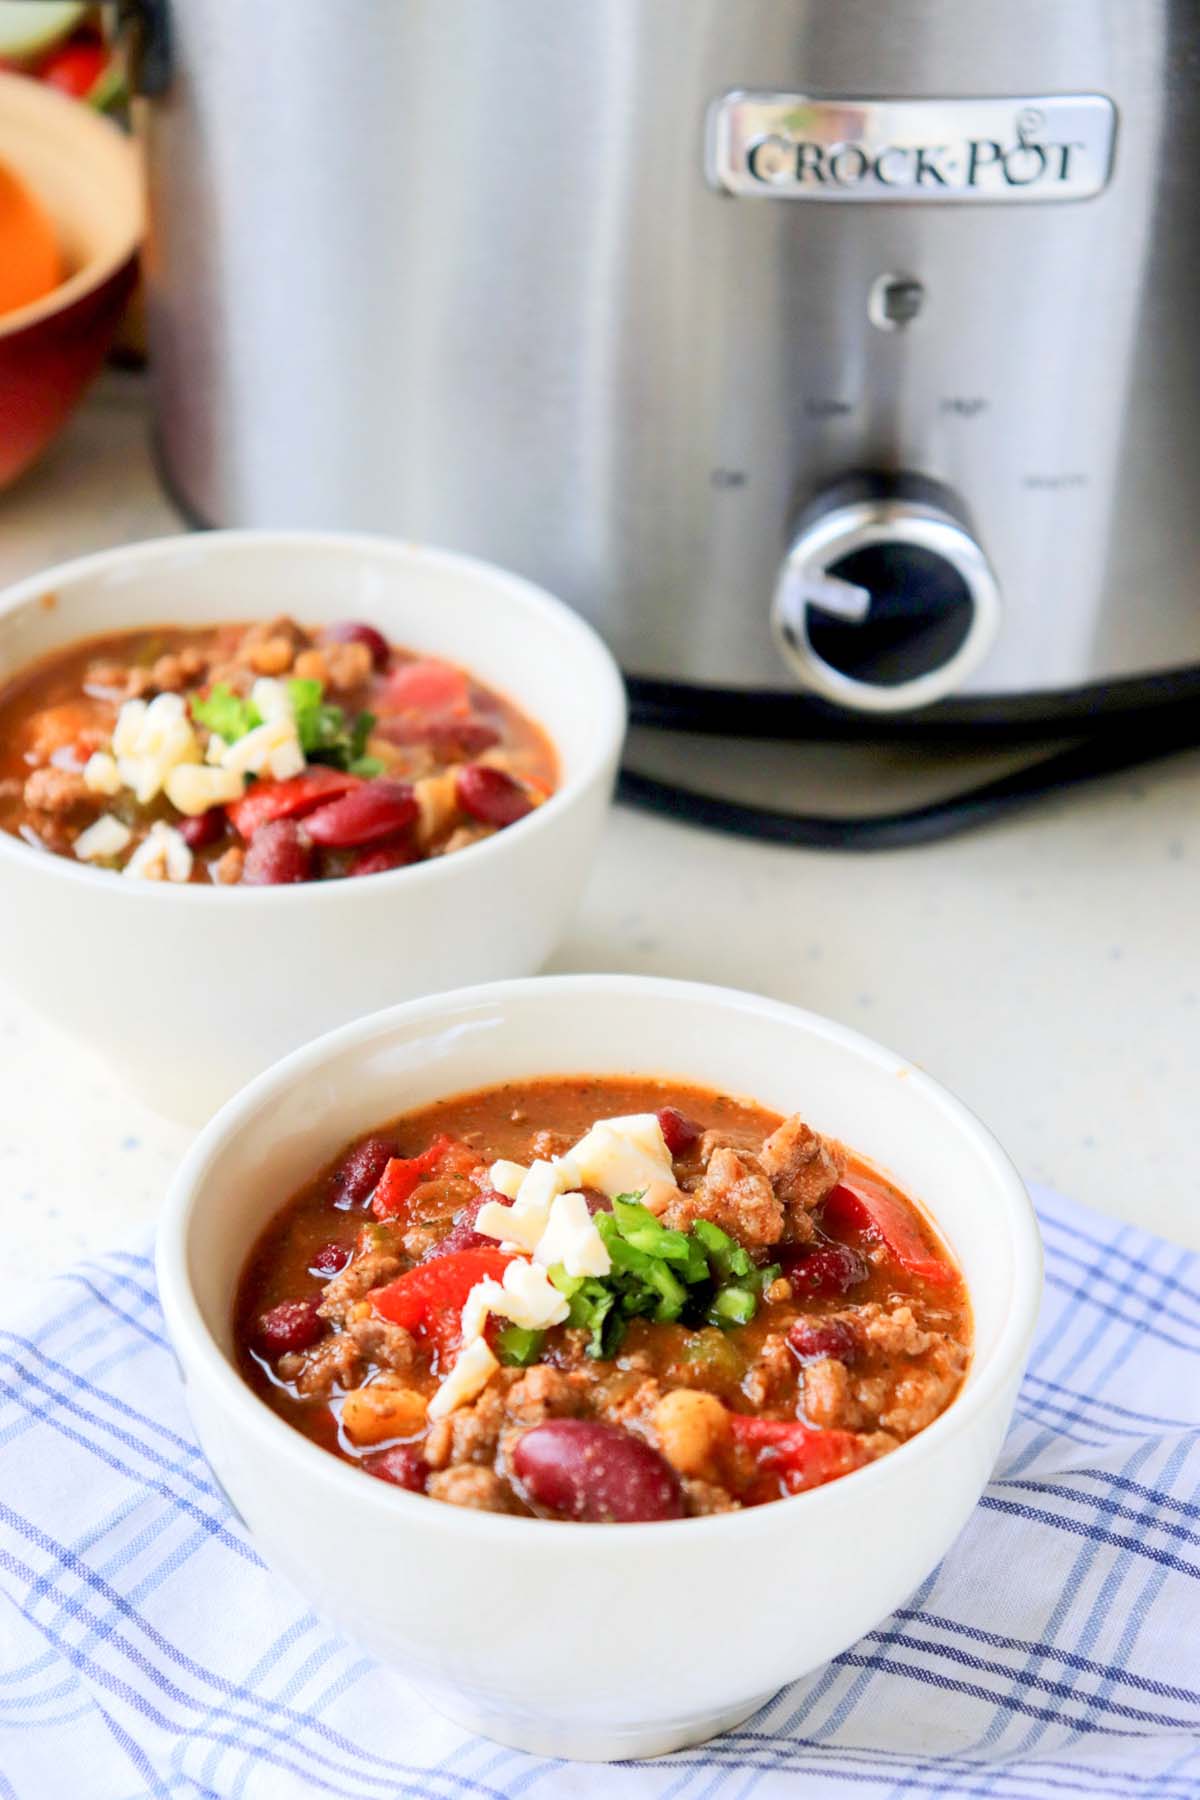 two bowls of chili in front of the Crock Pot.